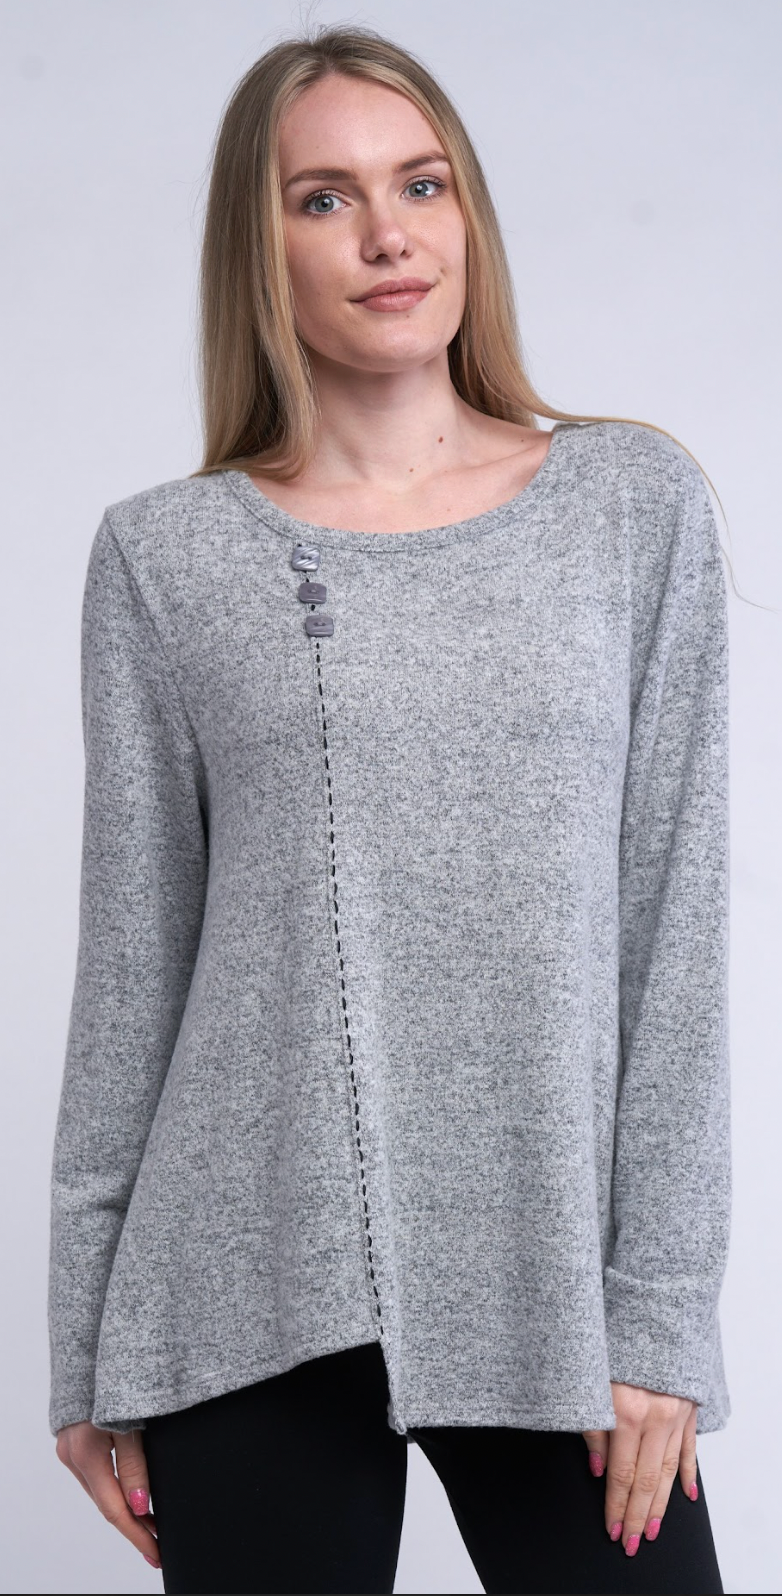 Gray Stitched Top